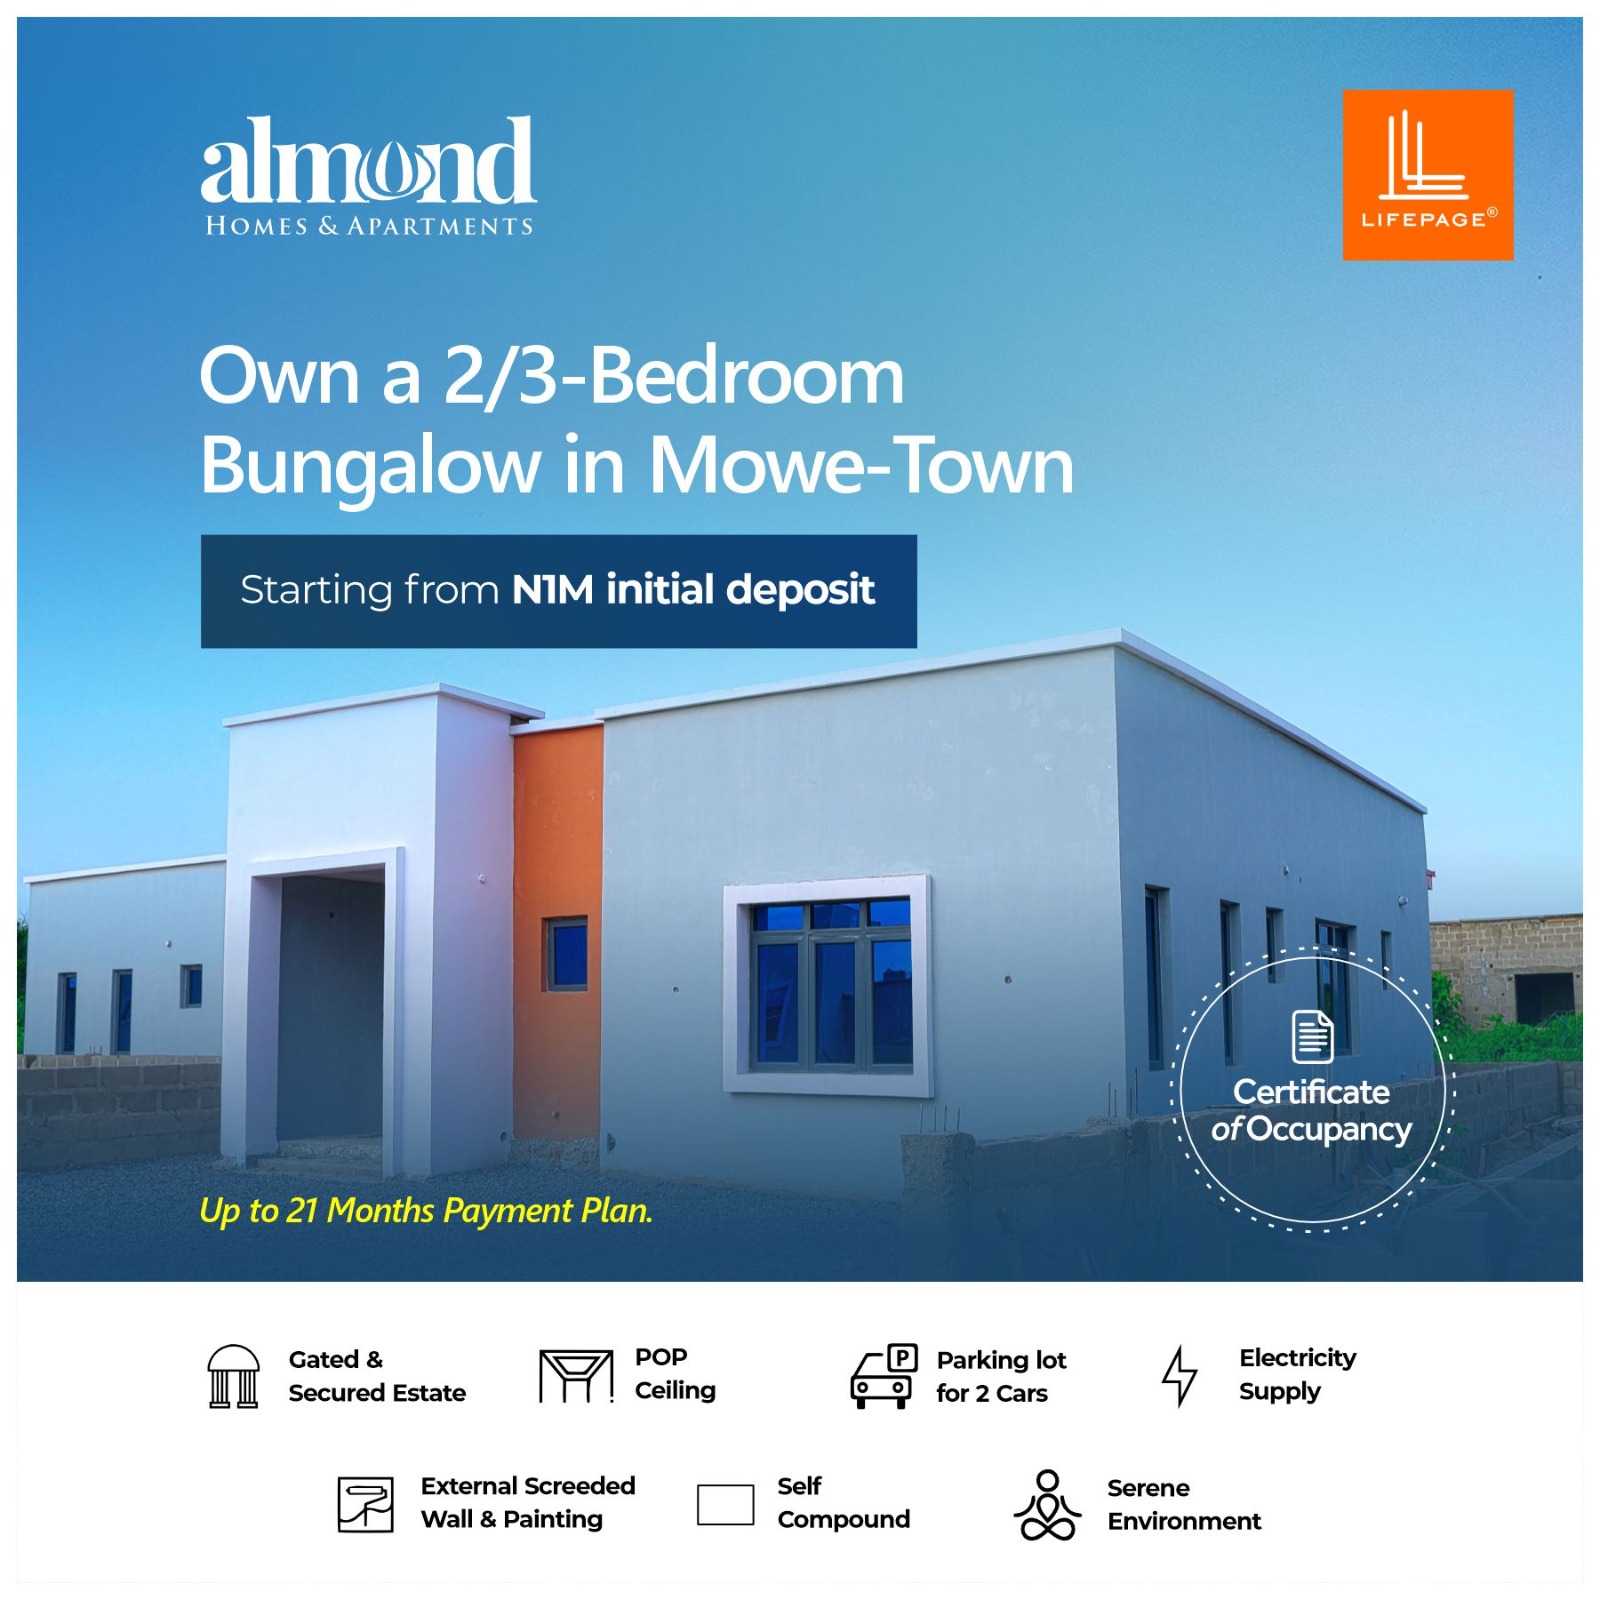 Almond Homes and Bungalows, Mowe